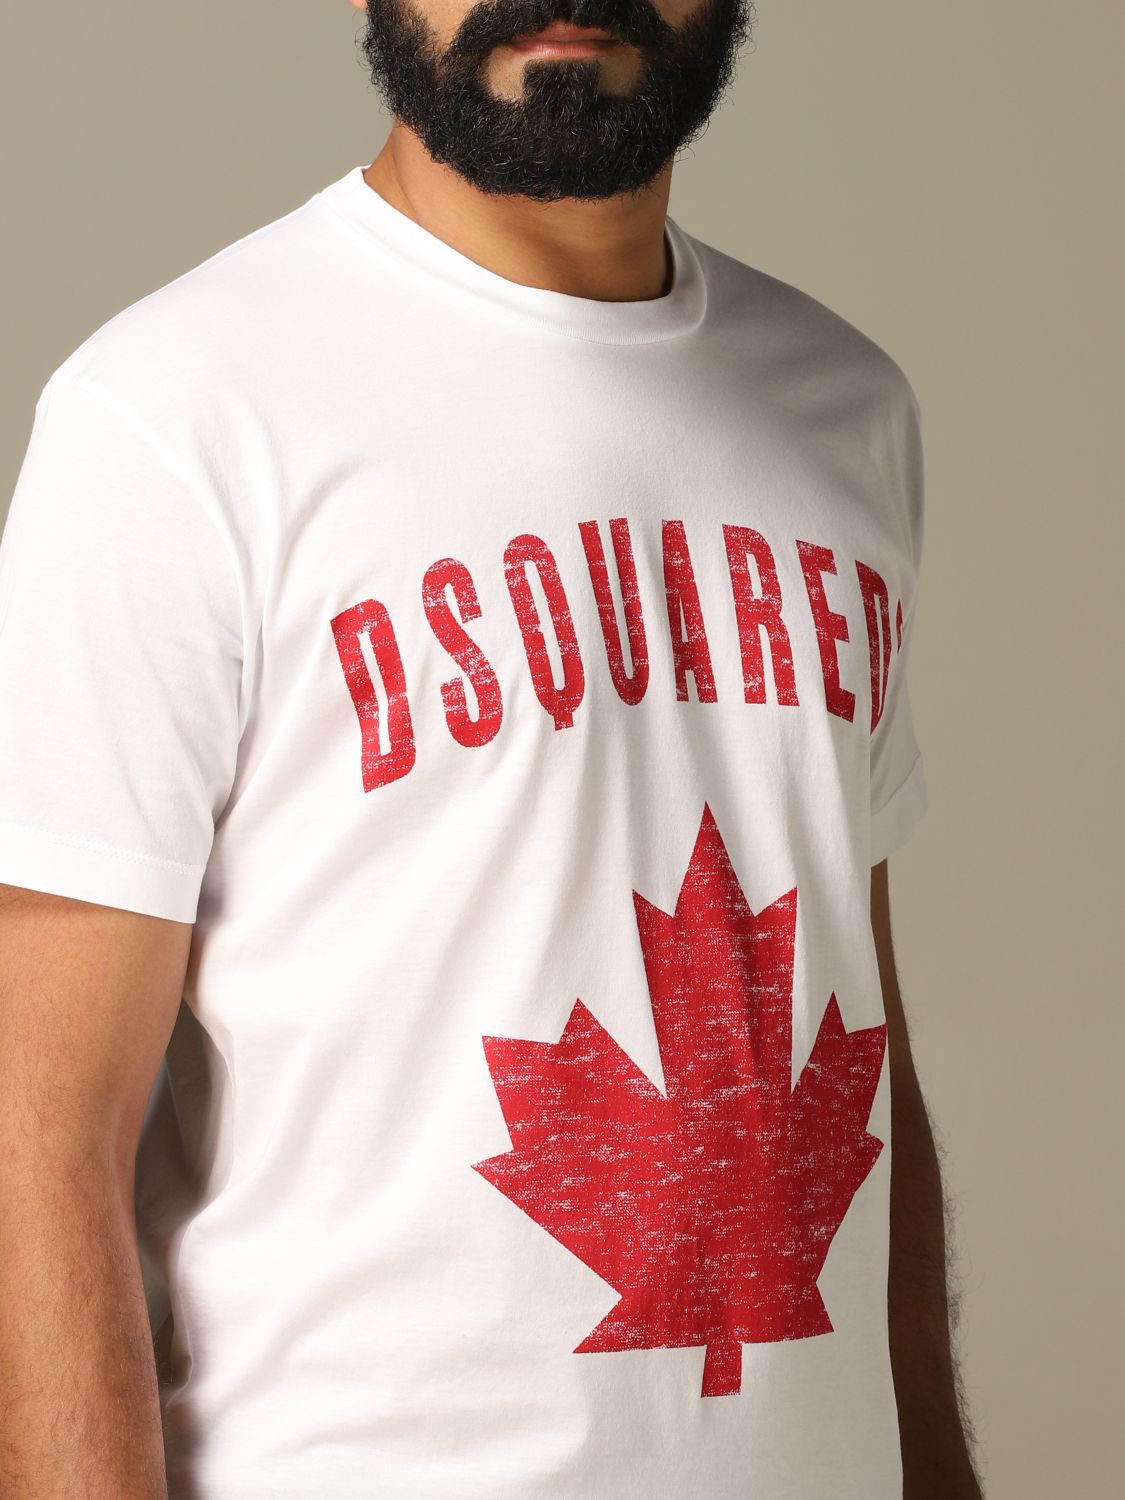 dsquared2 t shirt white and red